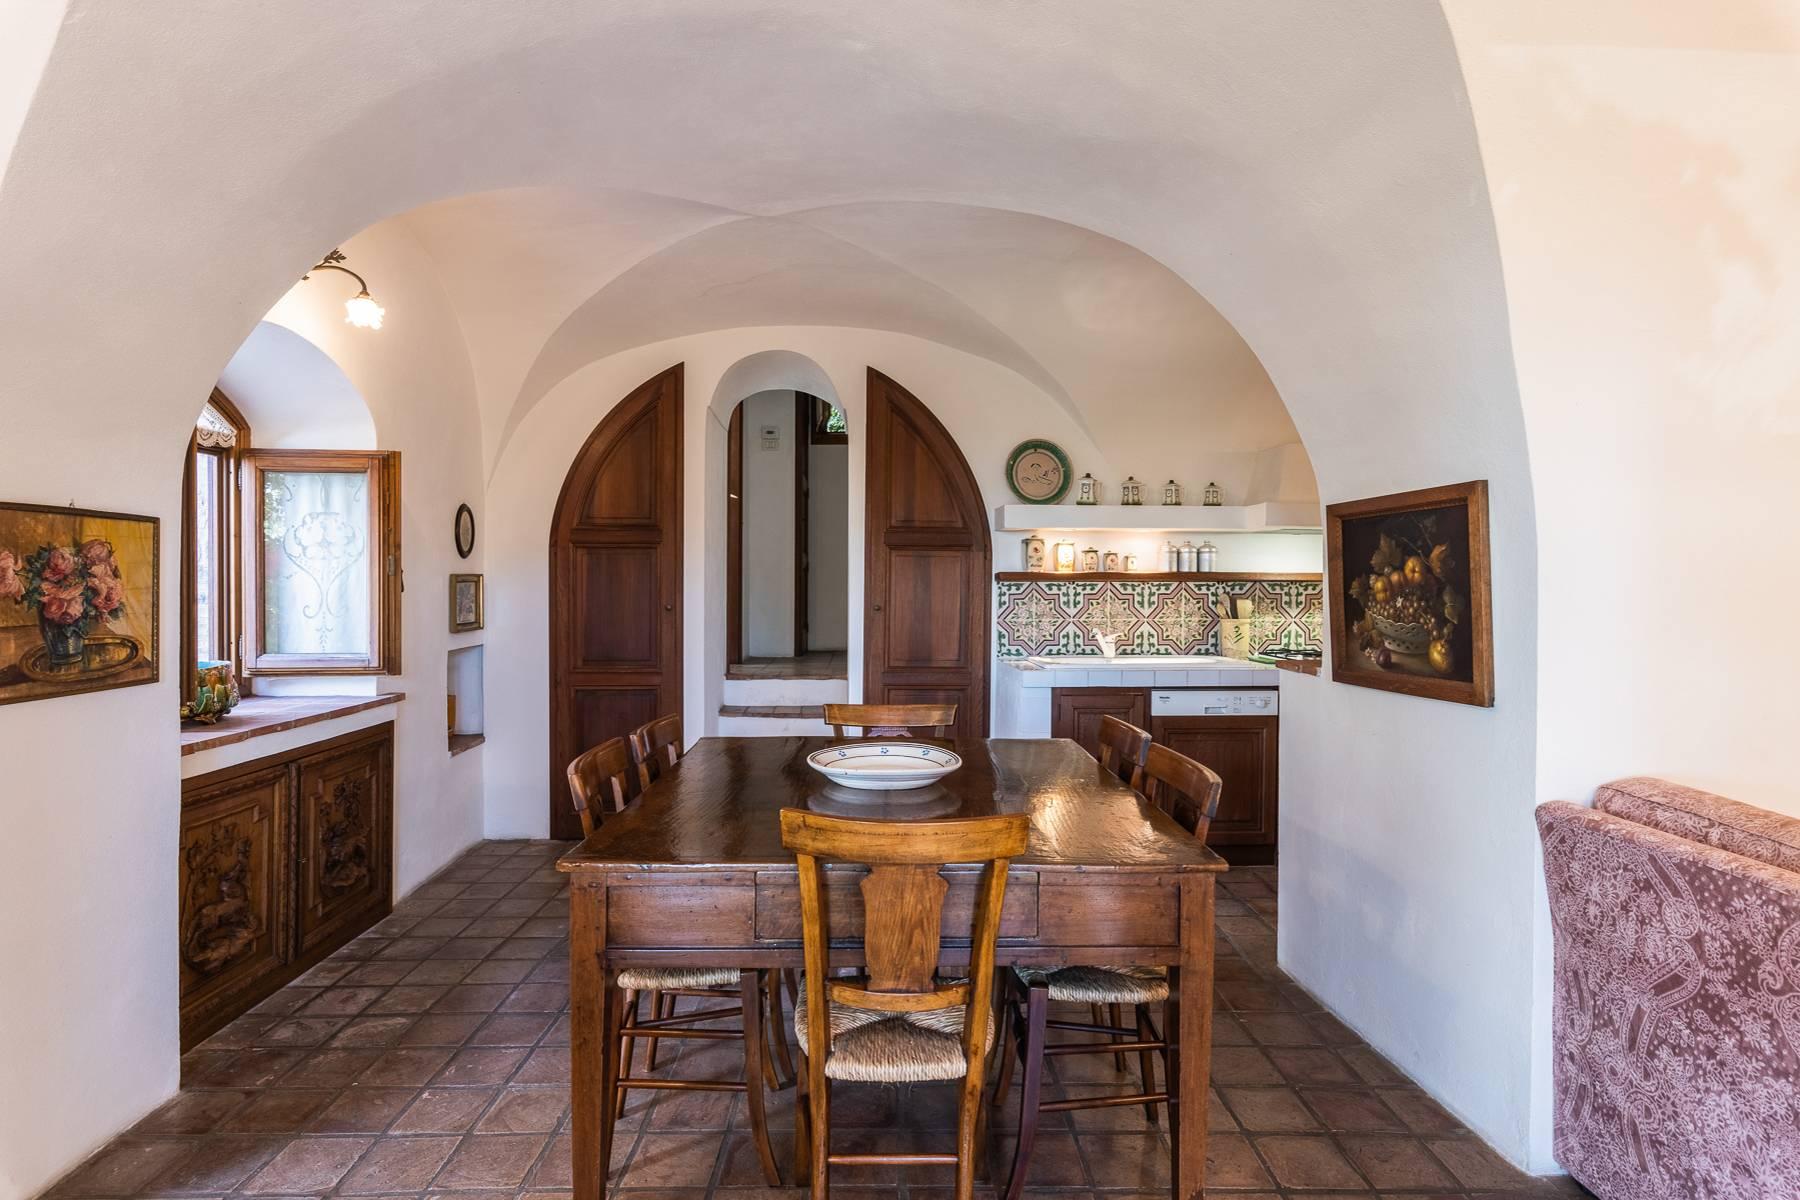 Charming villa in Torre Saracena, nestled in a tiny historic village overlooking Sanremo - Private Auction - 19